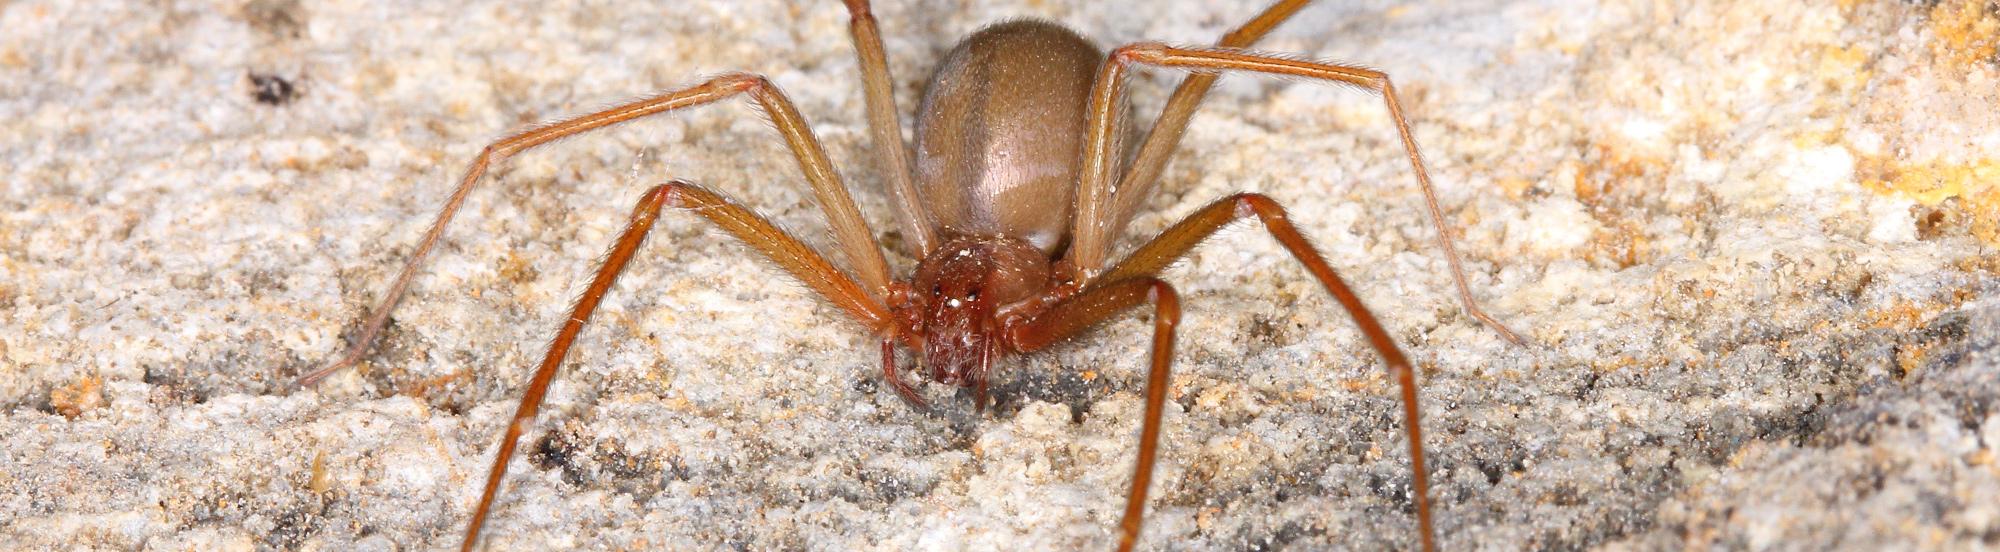 brown recluse spider in midwest home